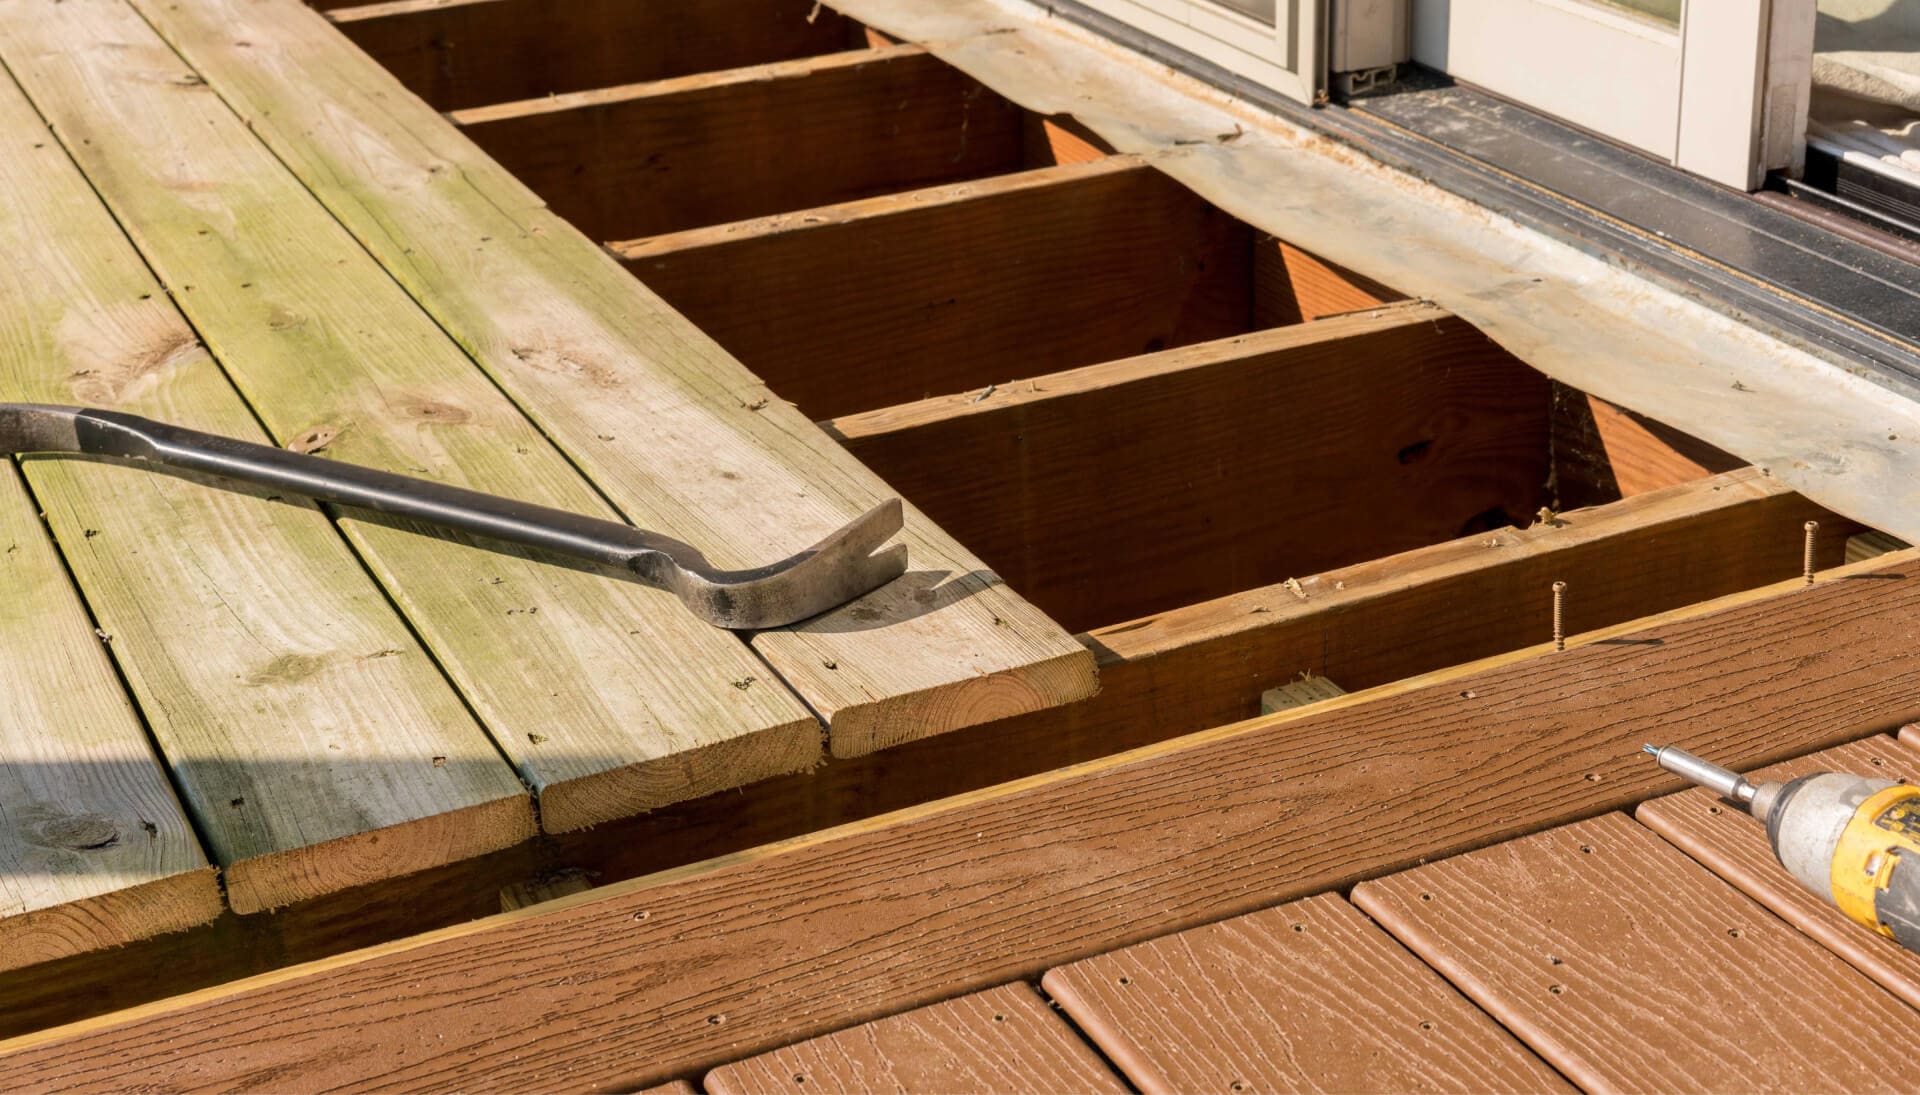 A professional deck repair service in Fayetteville, providing thorough inspections and maintenance to ensure the safety and durability of the structure